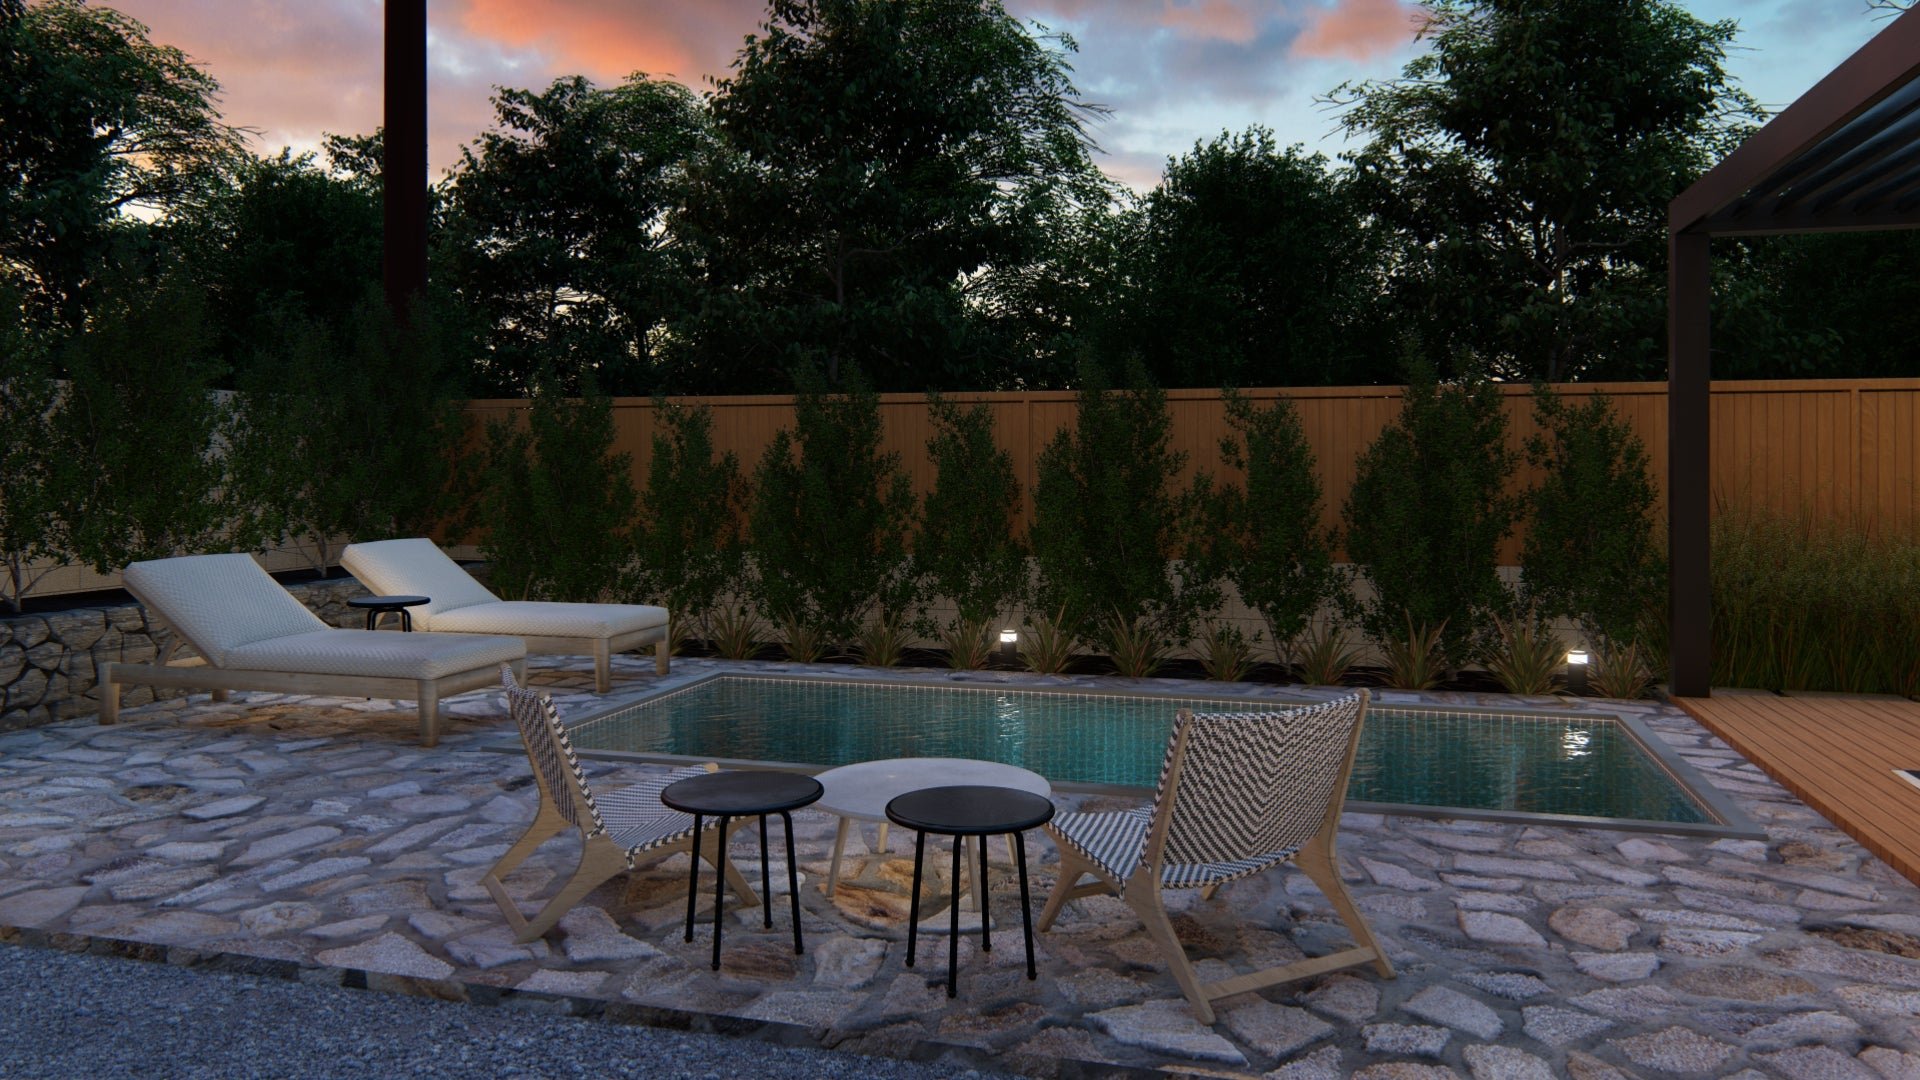 Two low-slung, columnar lights tuck into a poolside planting bed, casting a low glow for calm evenings on the pool deck.